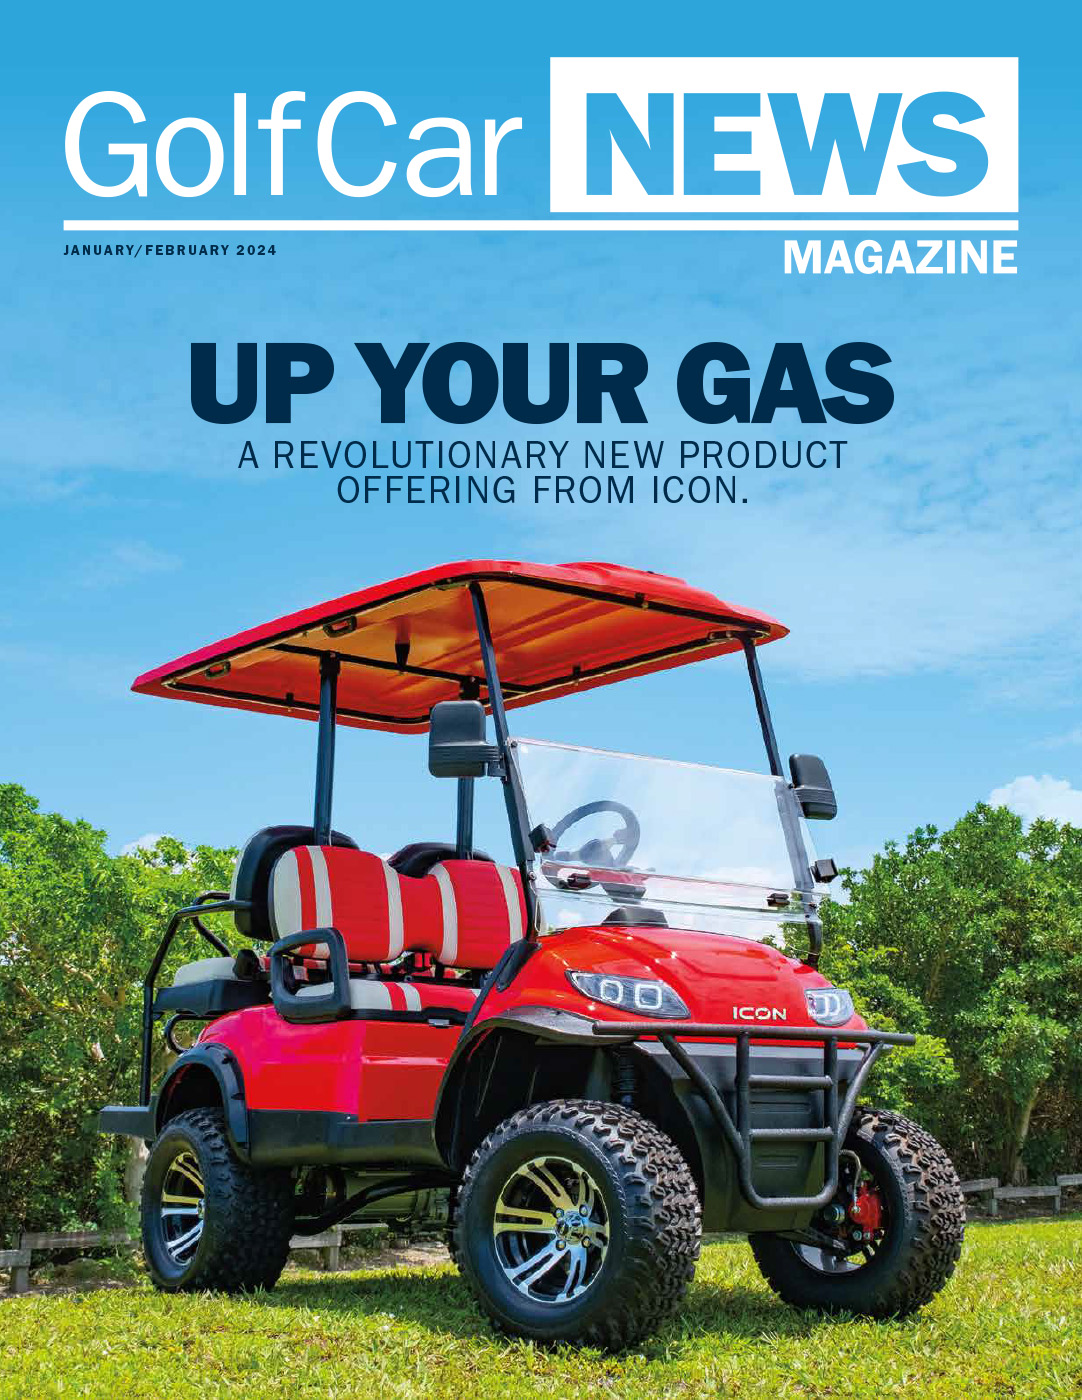 ICON Gas a Revolutionary New Product